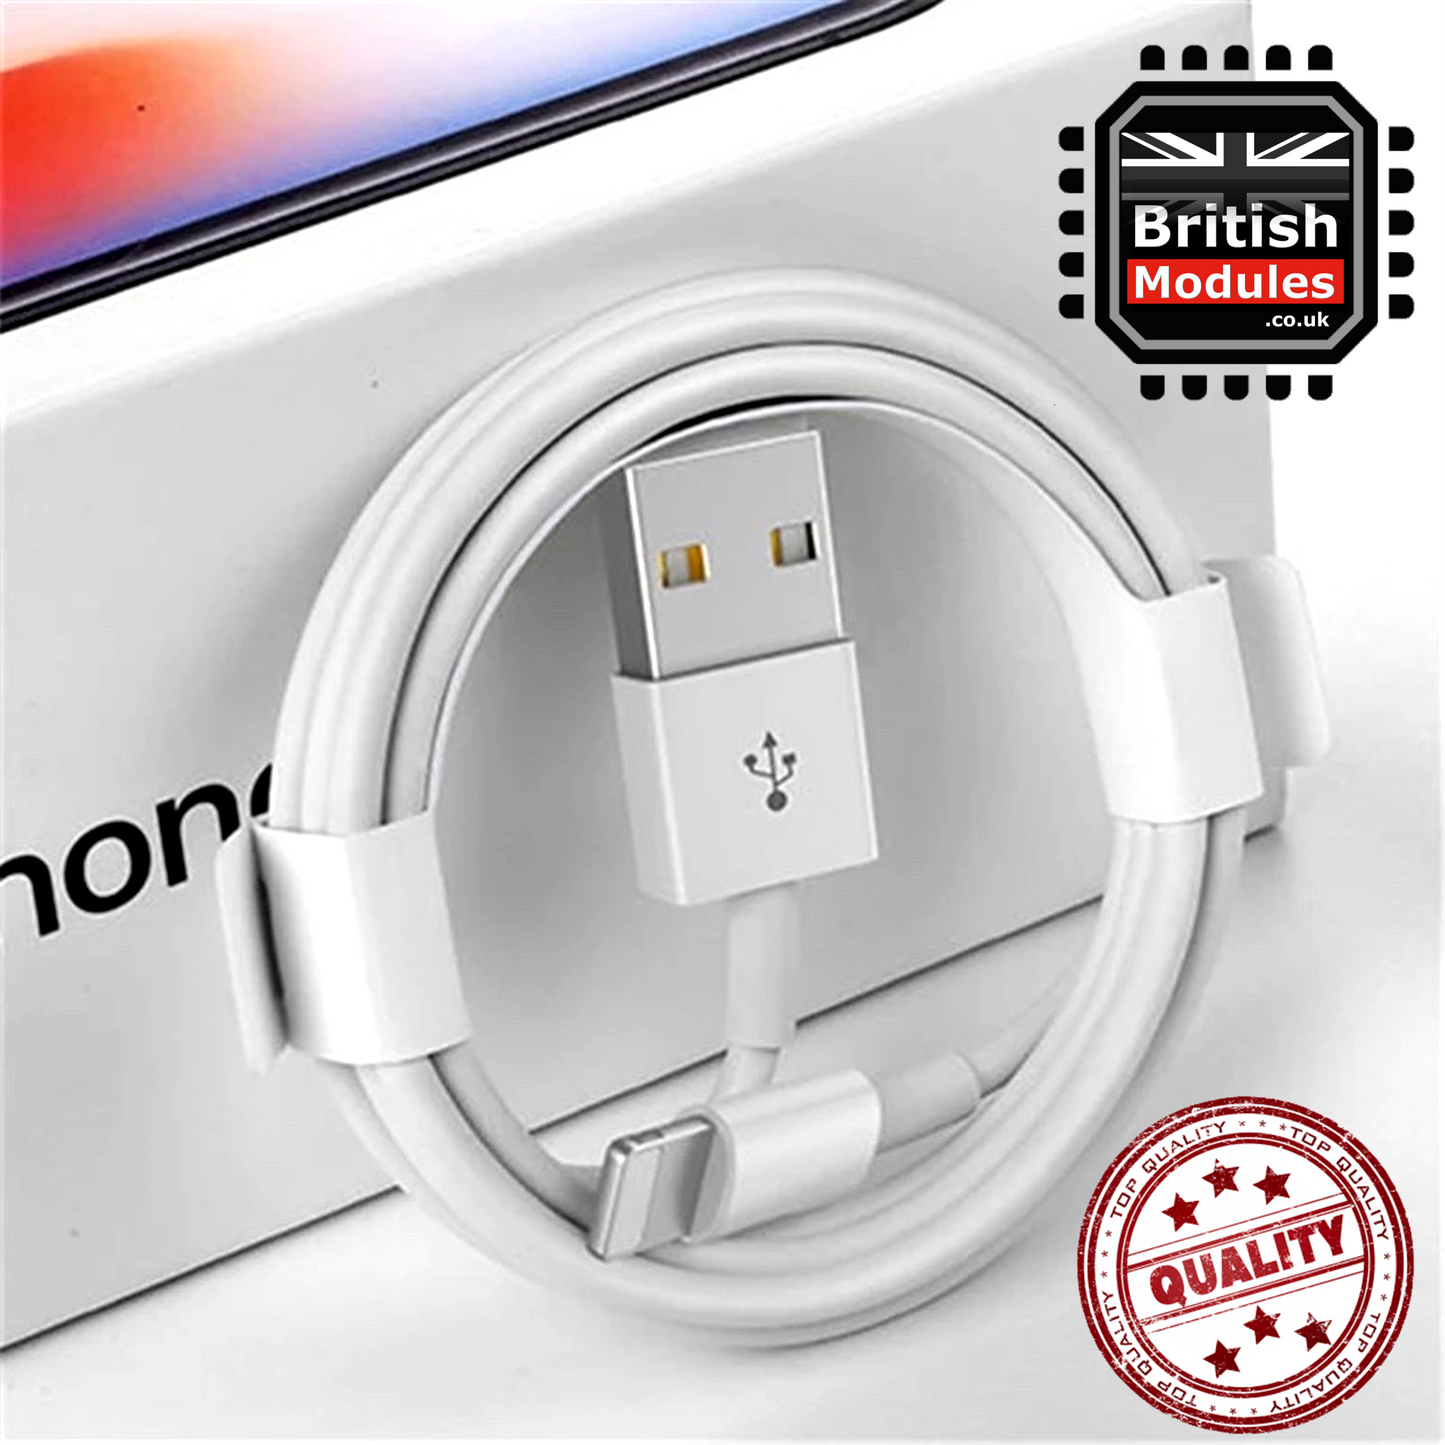 Premium iPhone lightning USB Charger Cable for Apple iPhone 5 6 7 8 Plus X XS Max